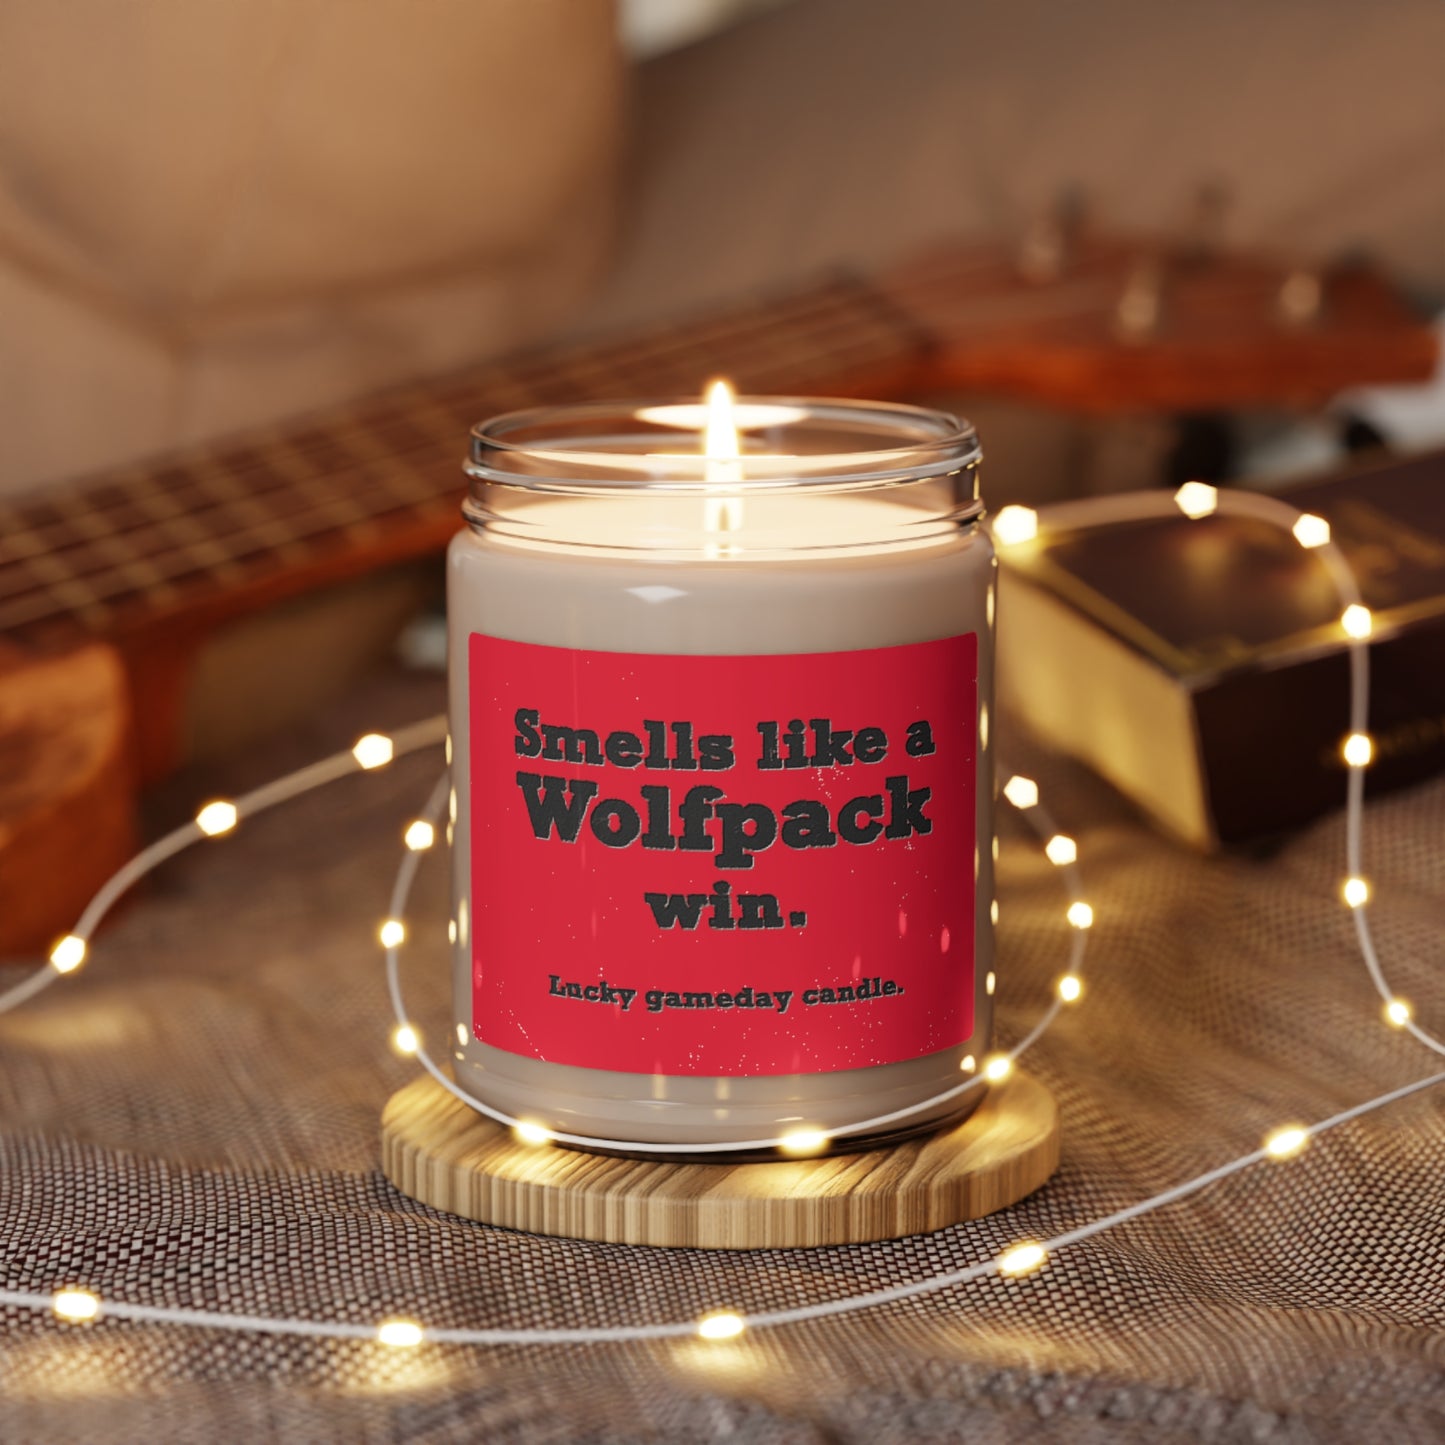 NC State - "Smells Like a Wolfpack Win" Scented Candle